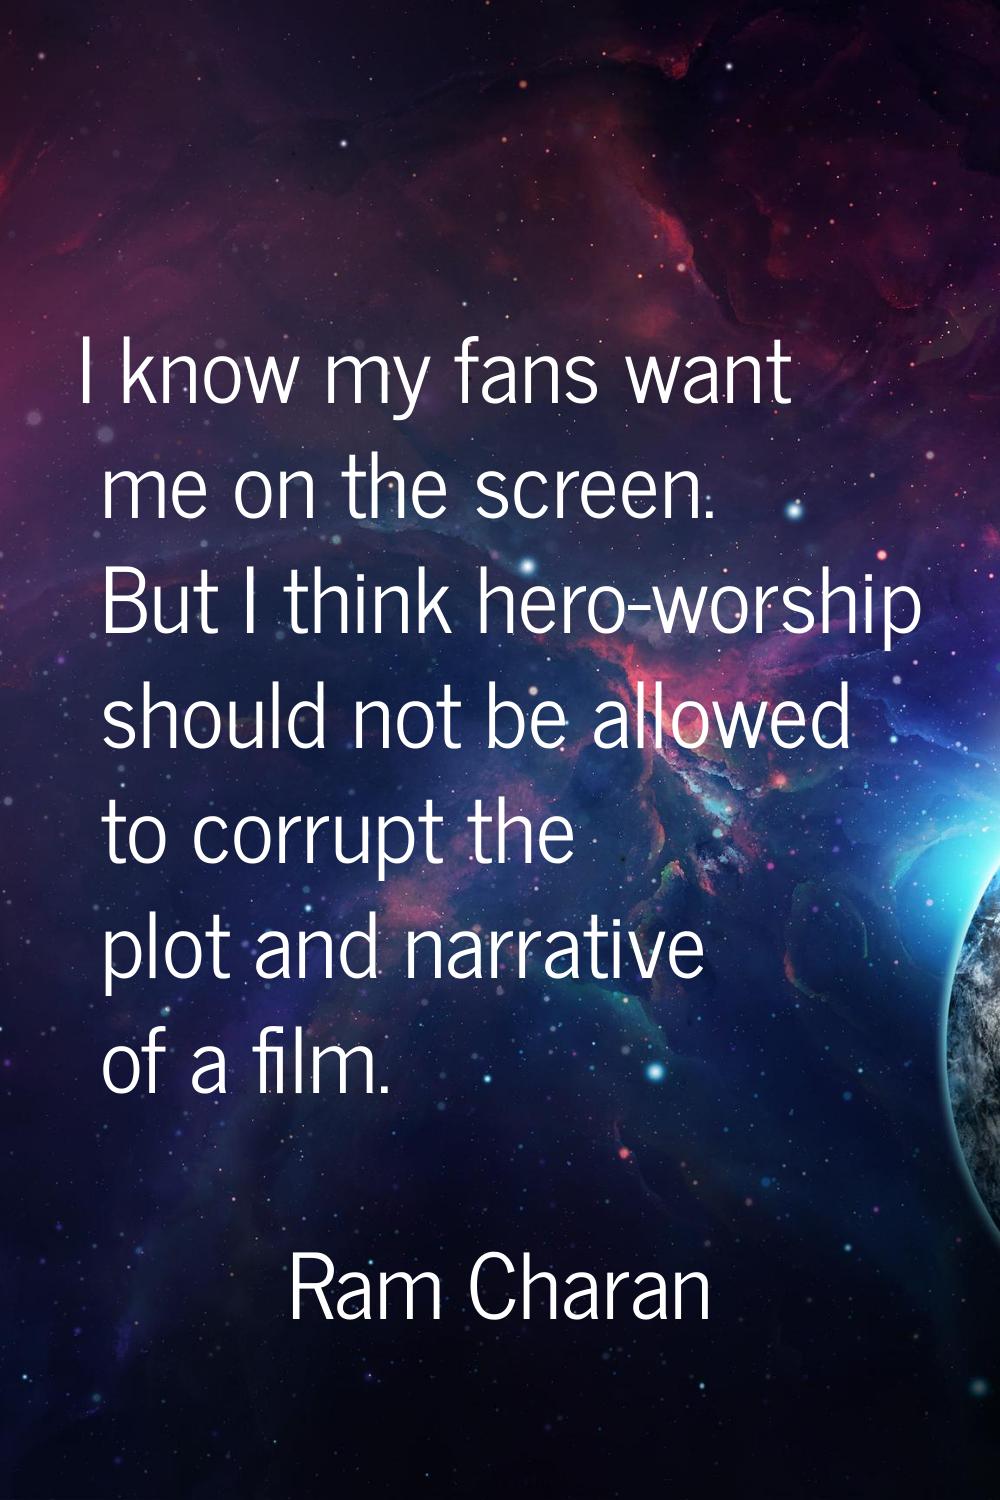 I know my fans want me on the screen. But I think hero-worship should not be allowed to corrupt the